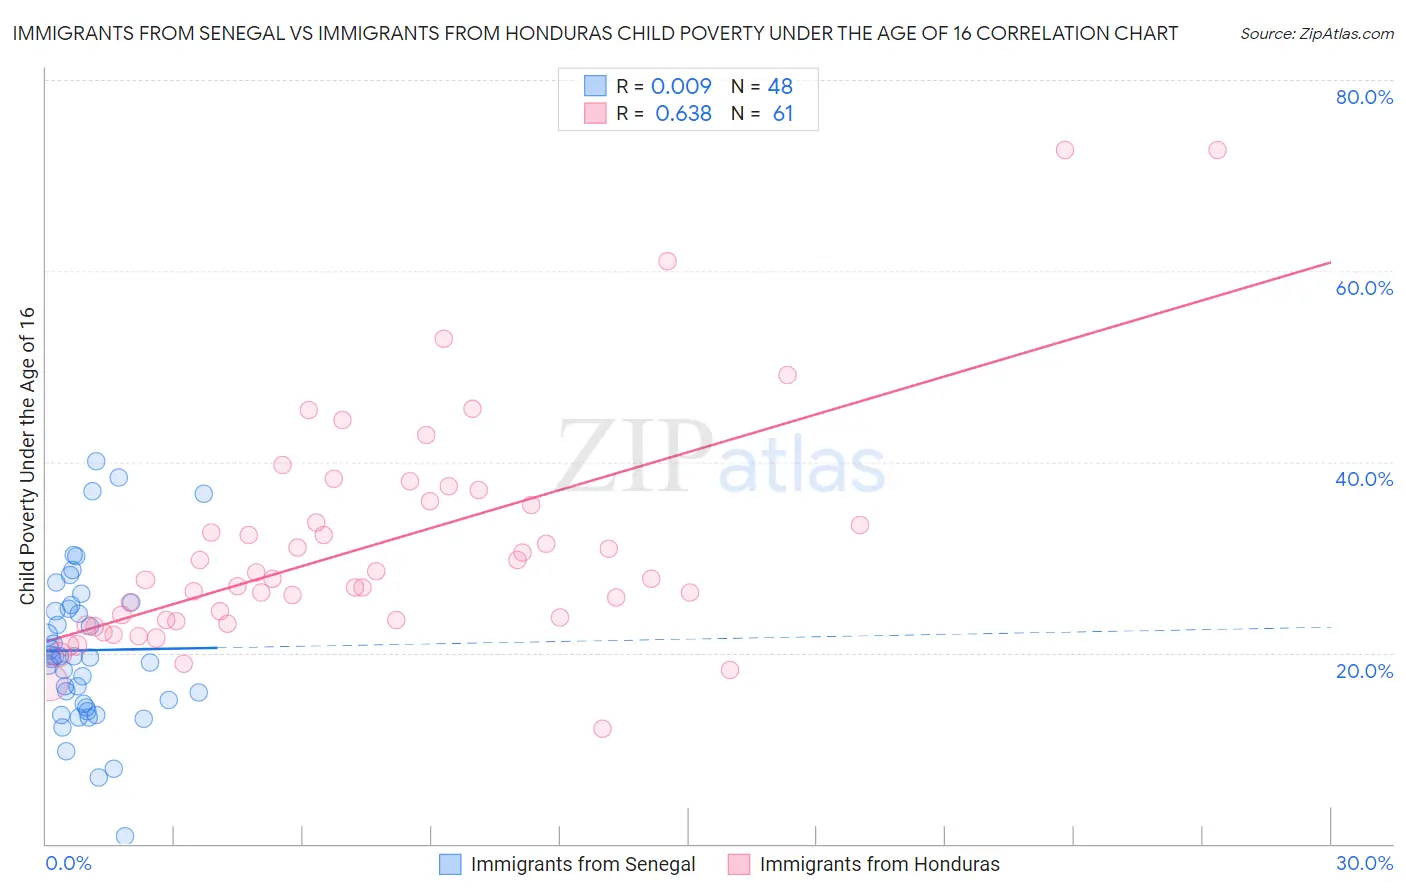 Immigrants from Senegal vs Immigrants from Honduras Child Poverty Under the Age of 16